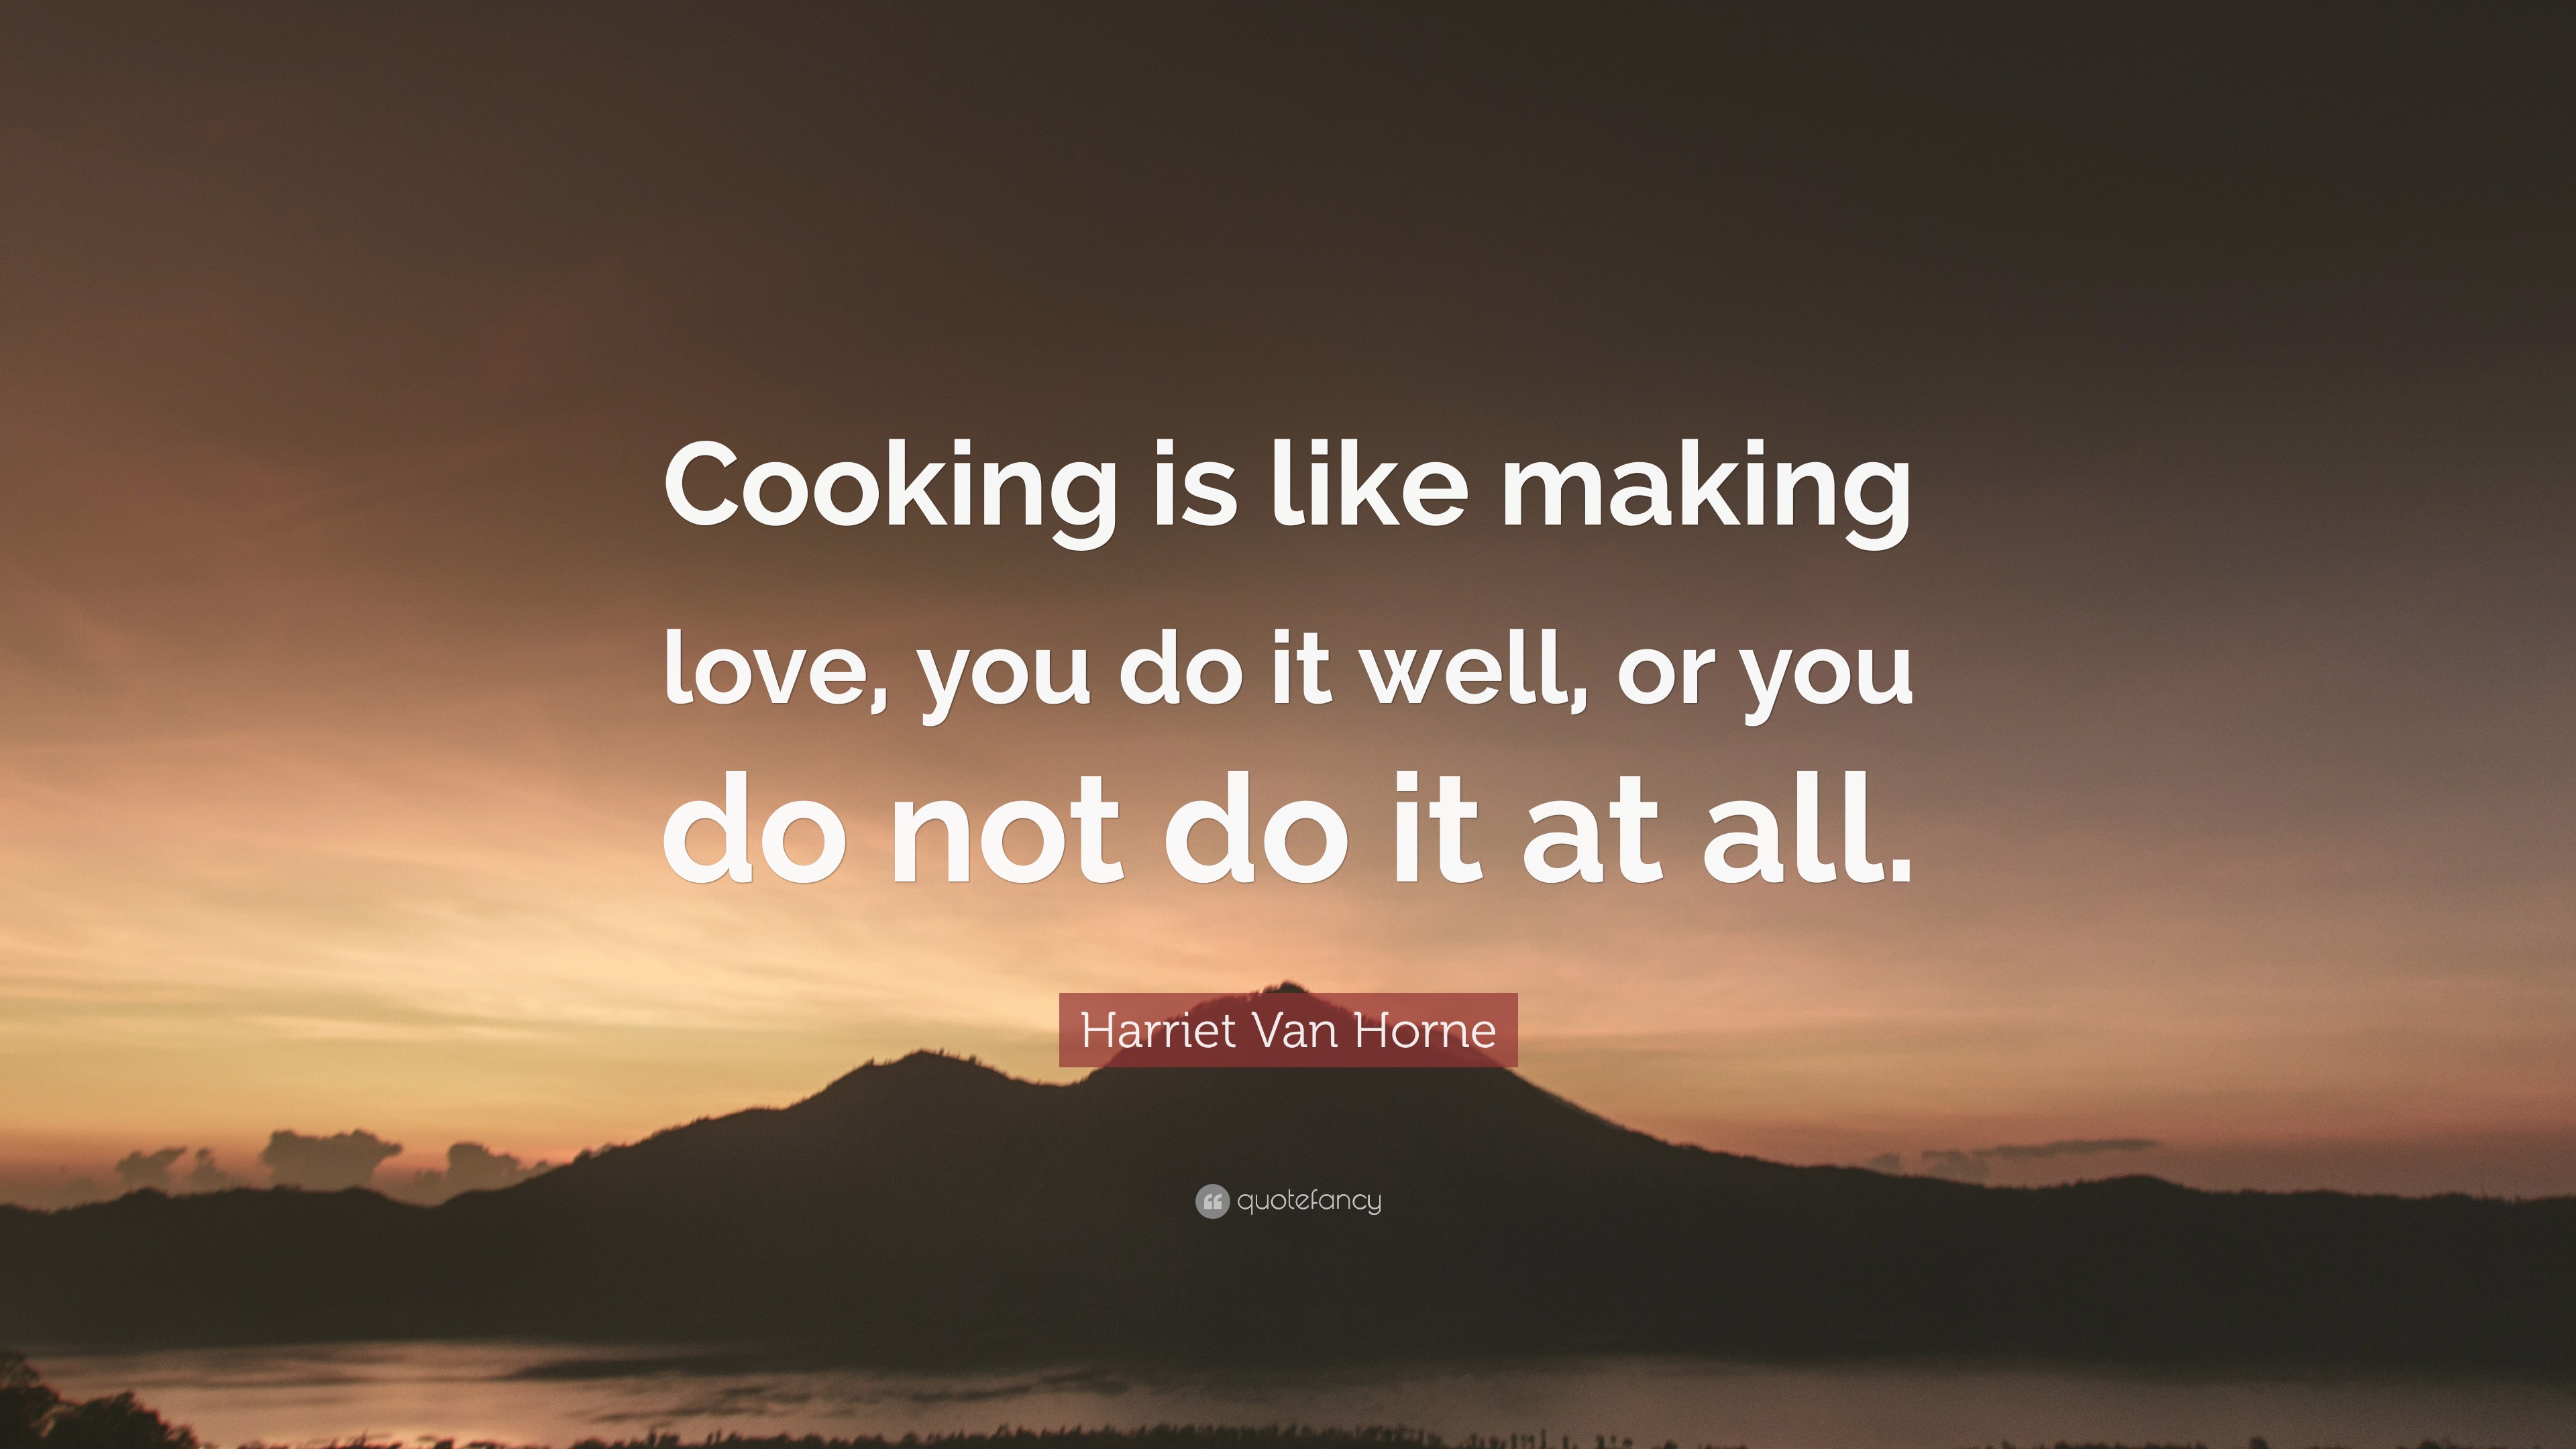 Harriet Van Horne Quote “Cooking is like making love you do it well